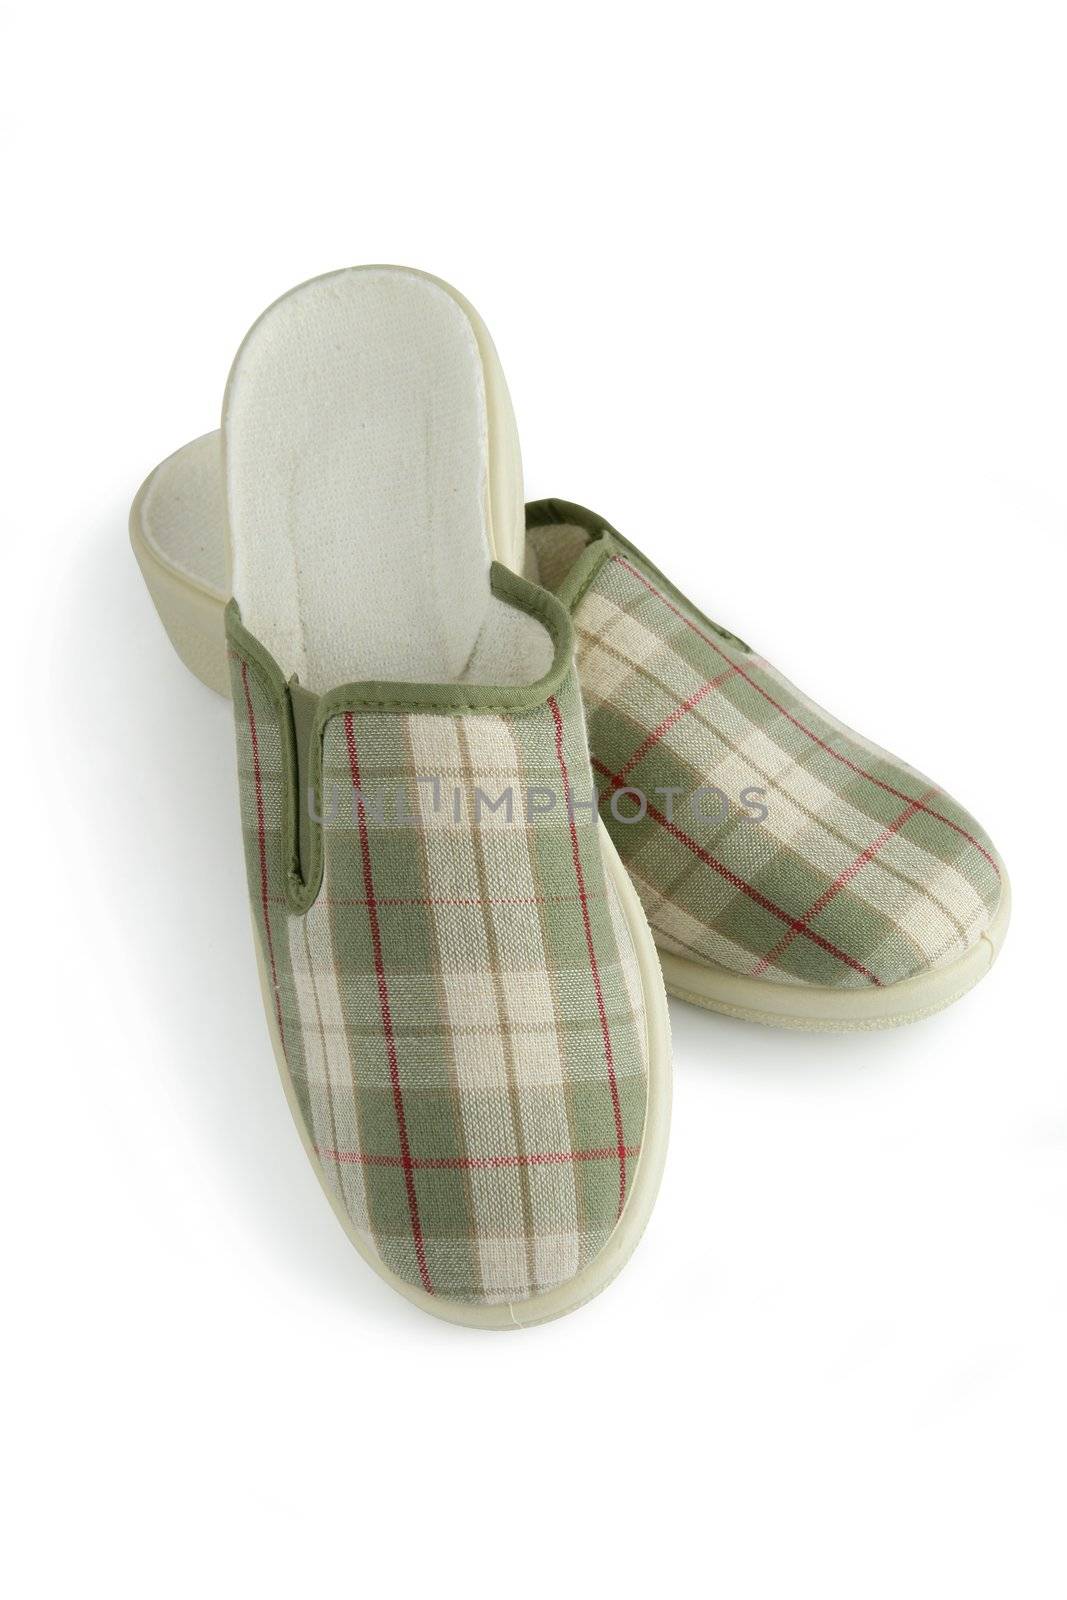 Pair of old fashioned slippers by phovoir